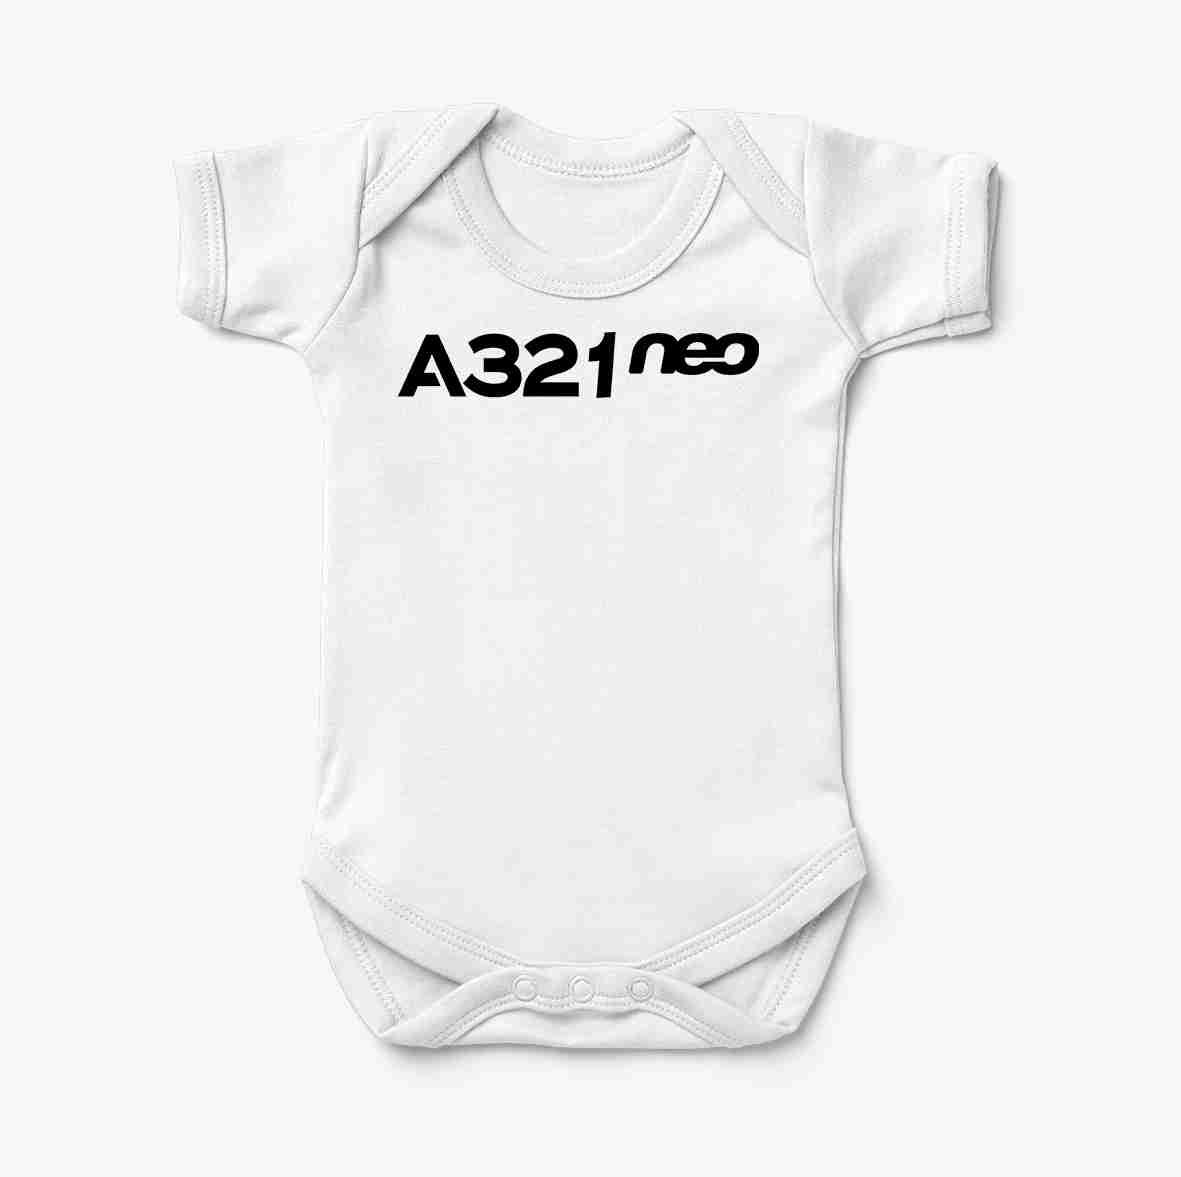 A321neo & Text Designed Baby Bodysuits